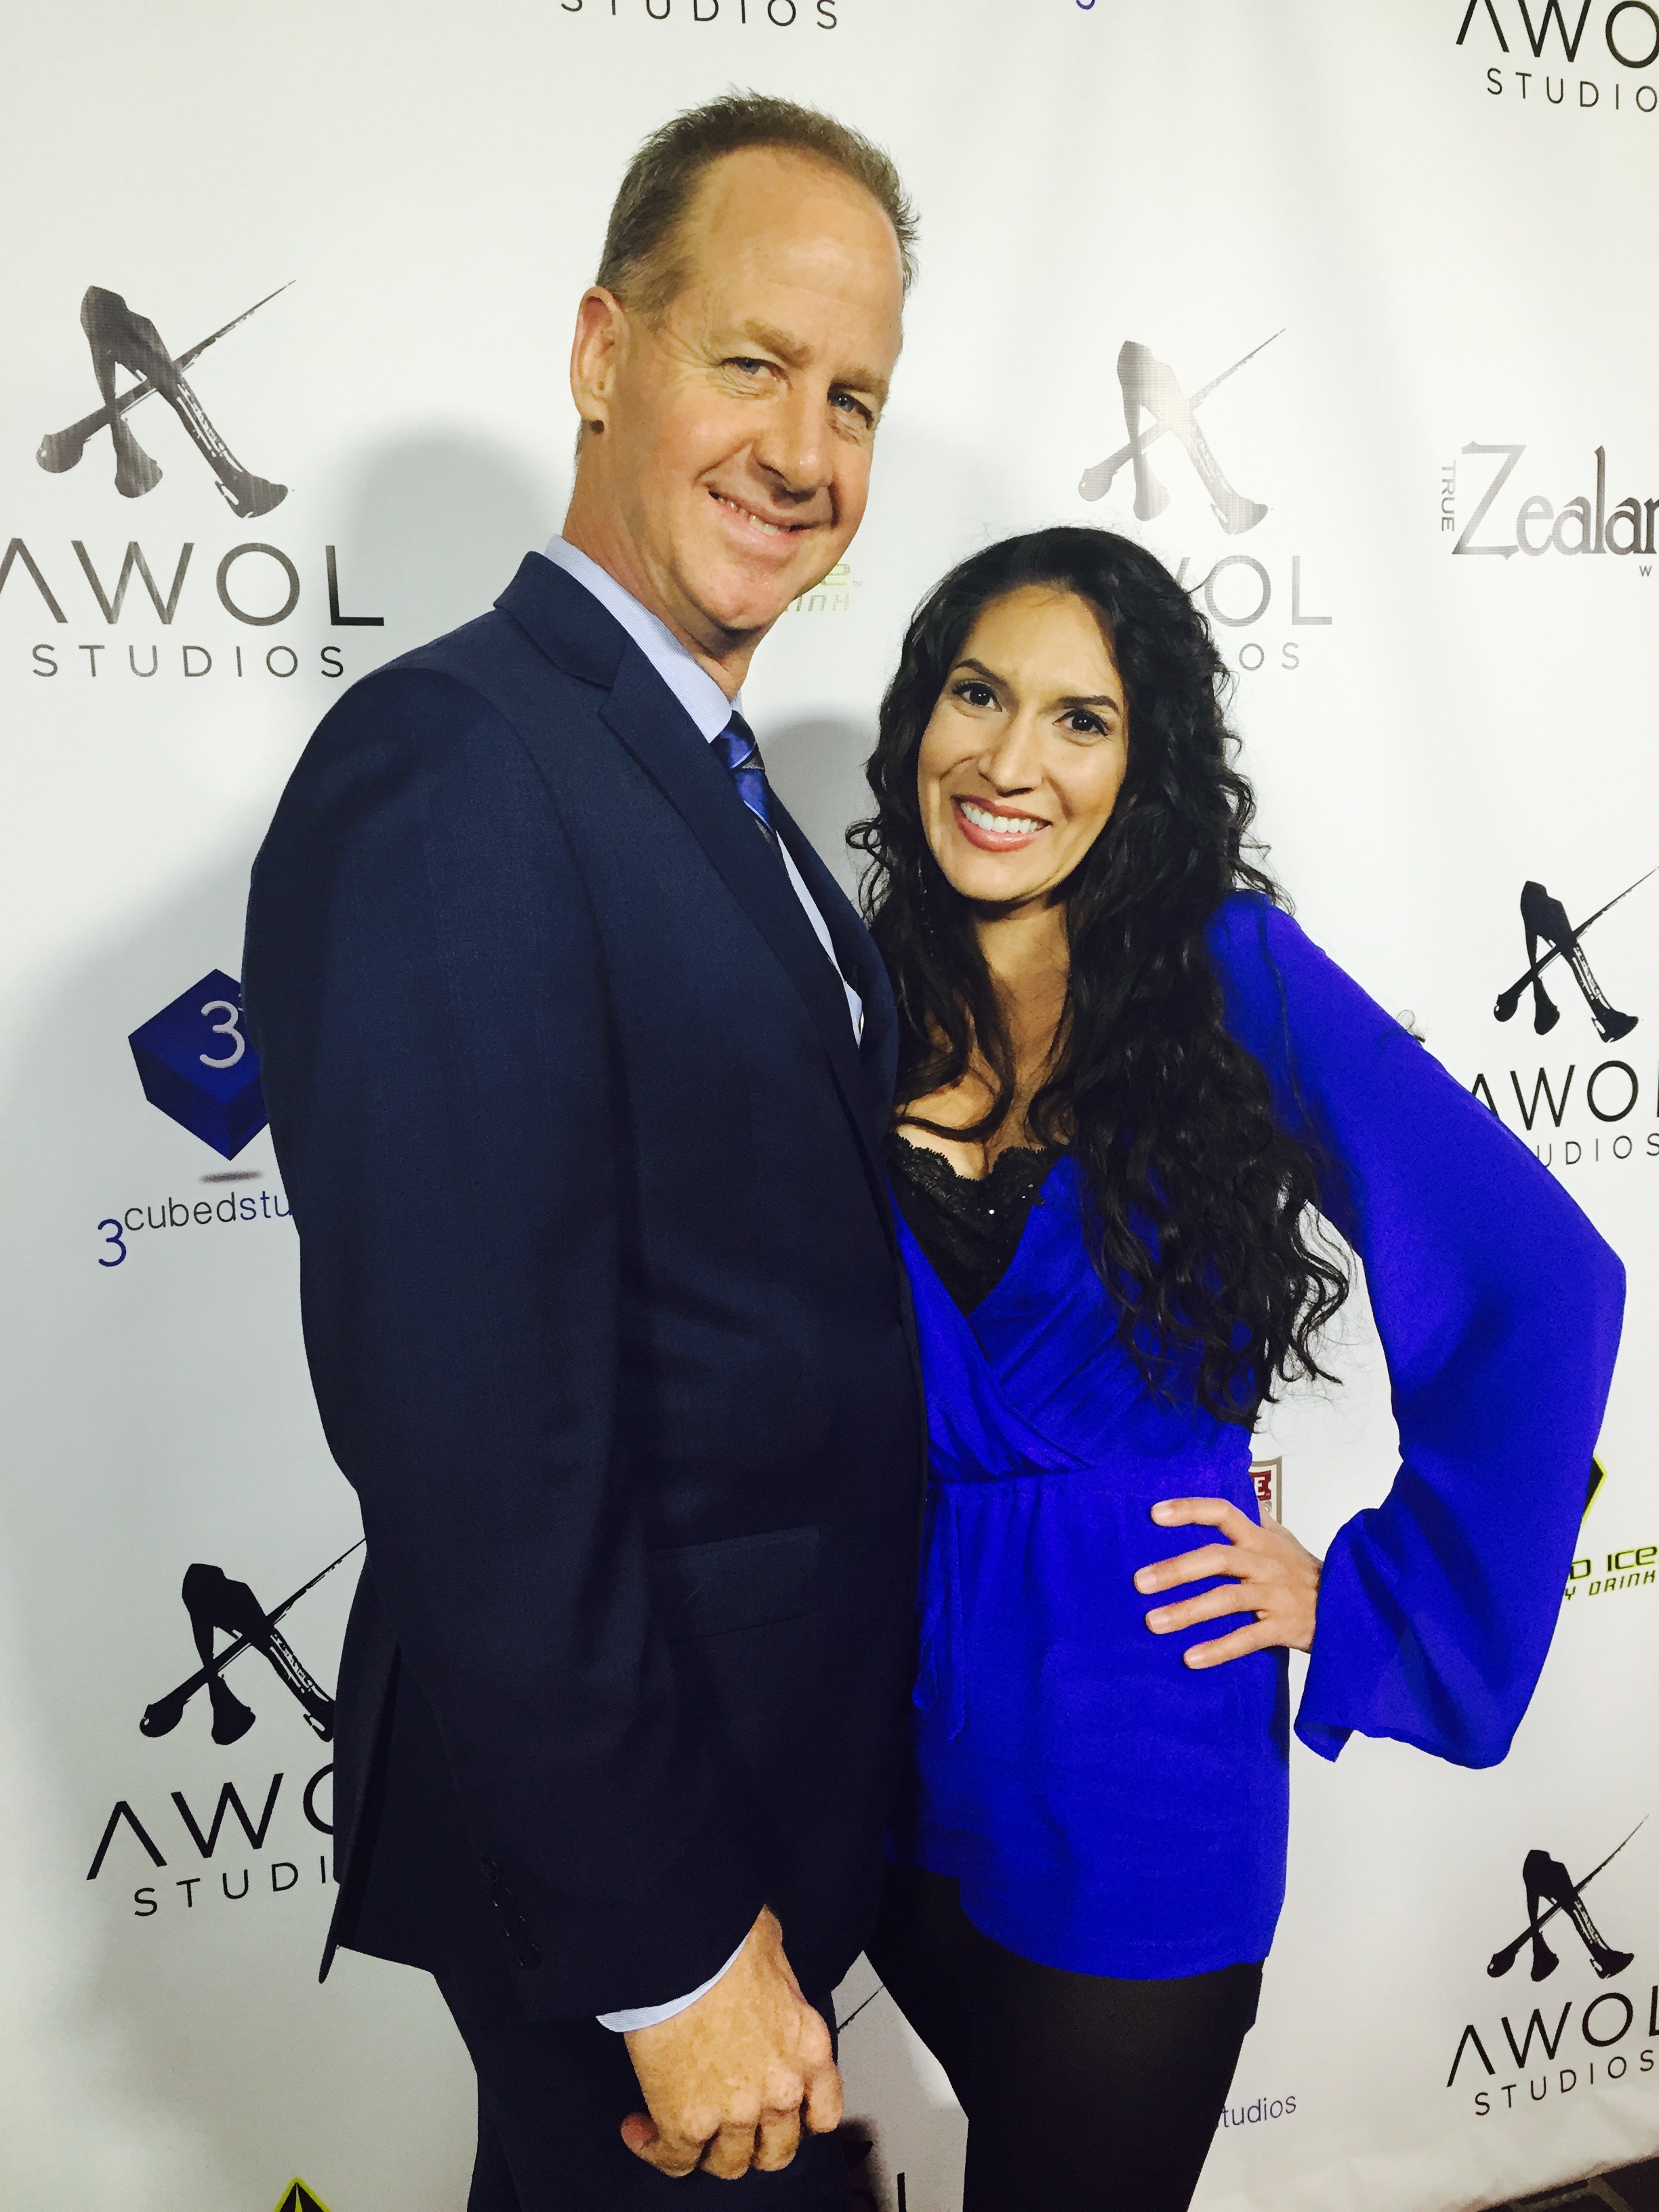 Rob Wuesthoff and Samantha Hope at the AWOL Studios launch party